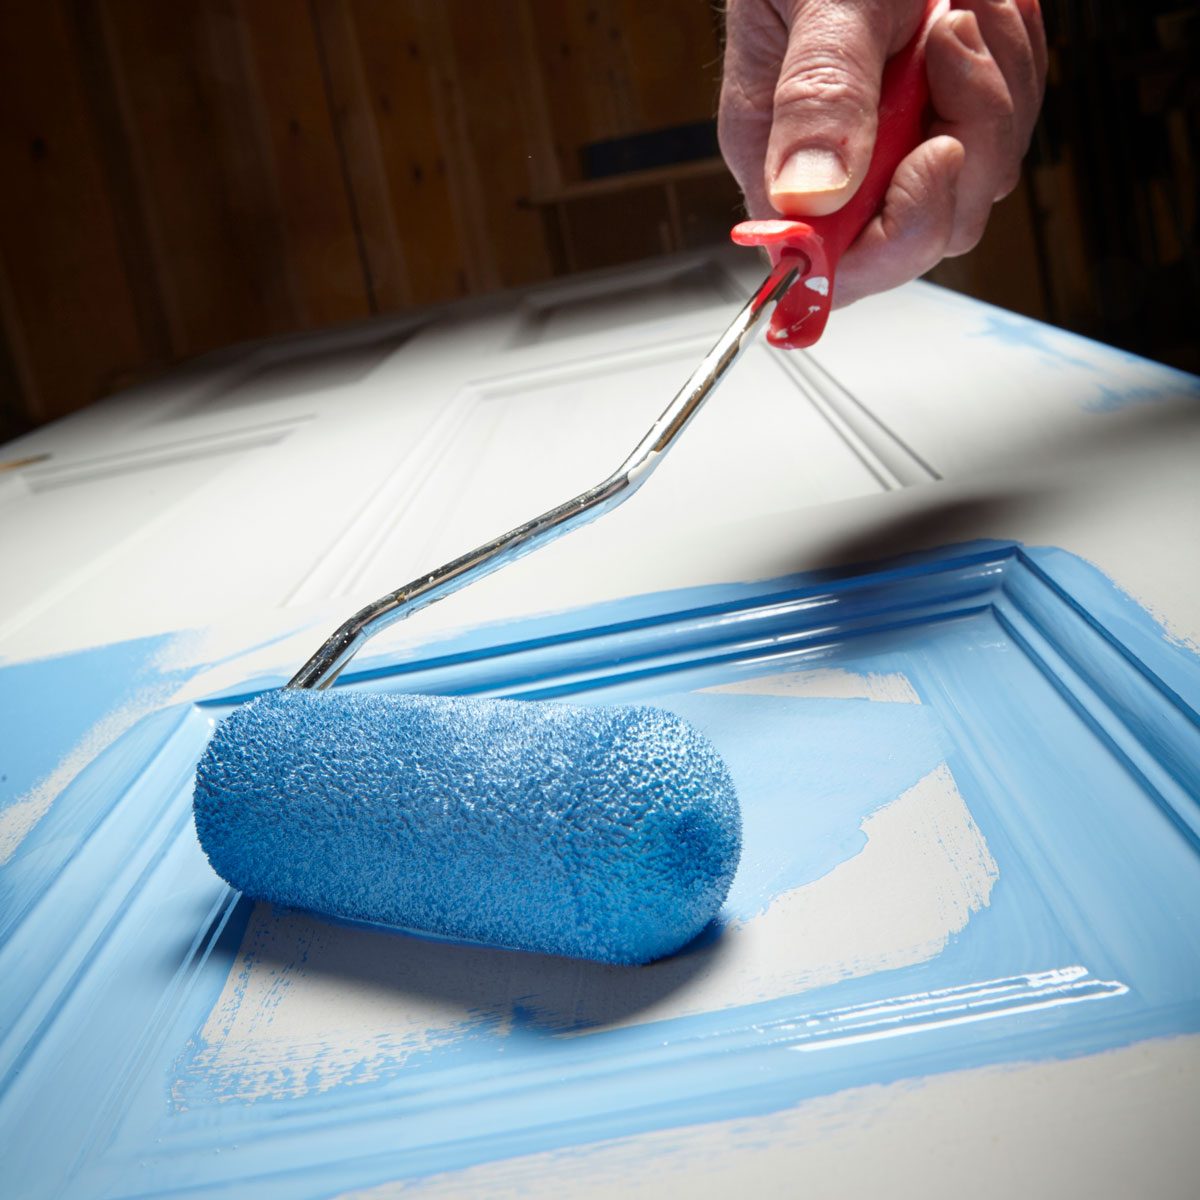 The Best Tips and Tricks for Painting on Wood Panels